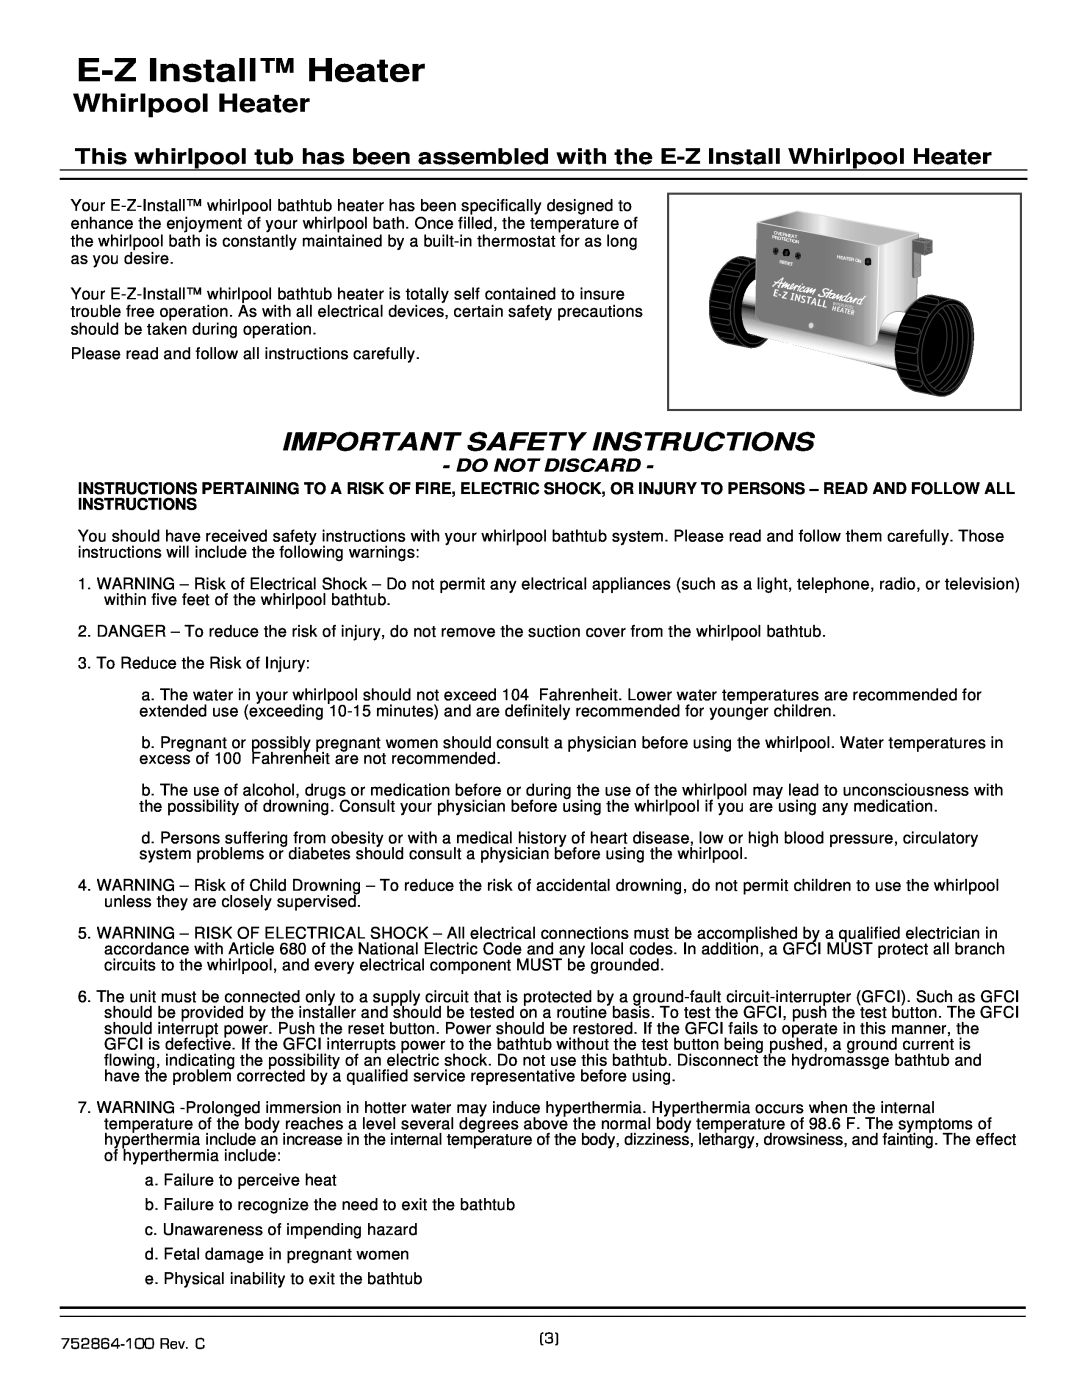 American Standard 6060E SERIES E-Z Install Heater, Whirlpool Heater, Important Safety Instructions, Do Not Discard 